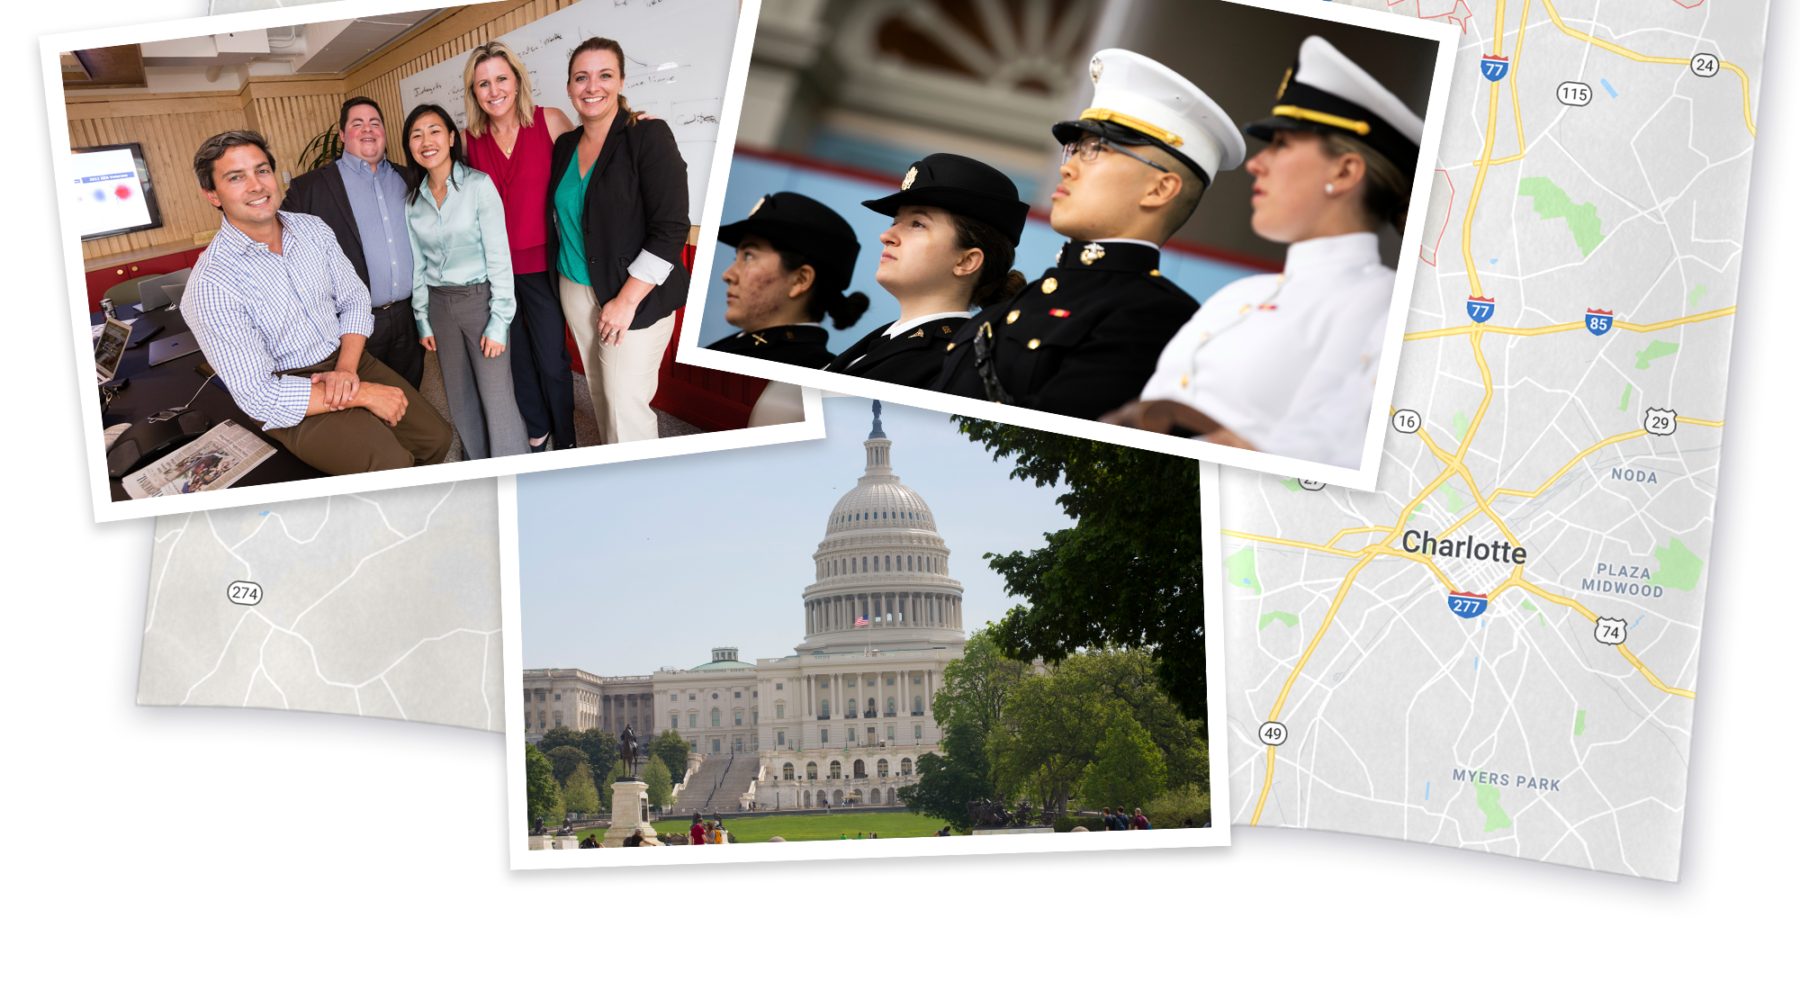 A collage of pictures, with the staff of With Honor, a capital building, and a map of Carlotte